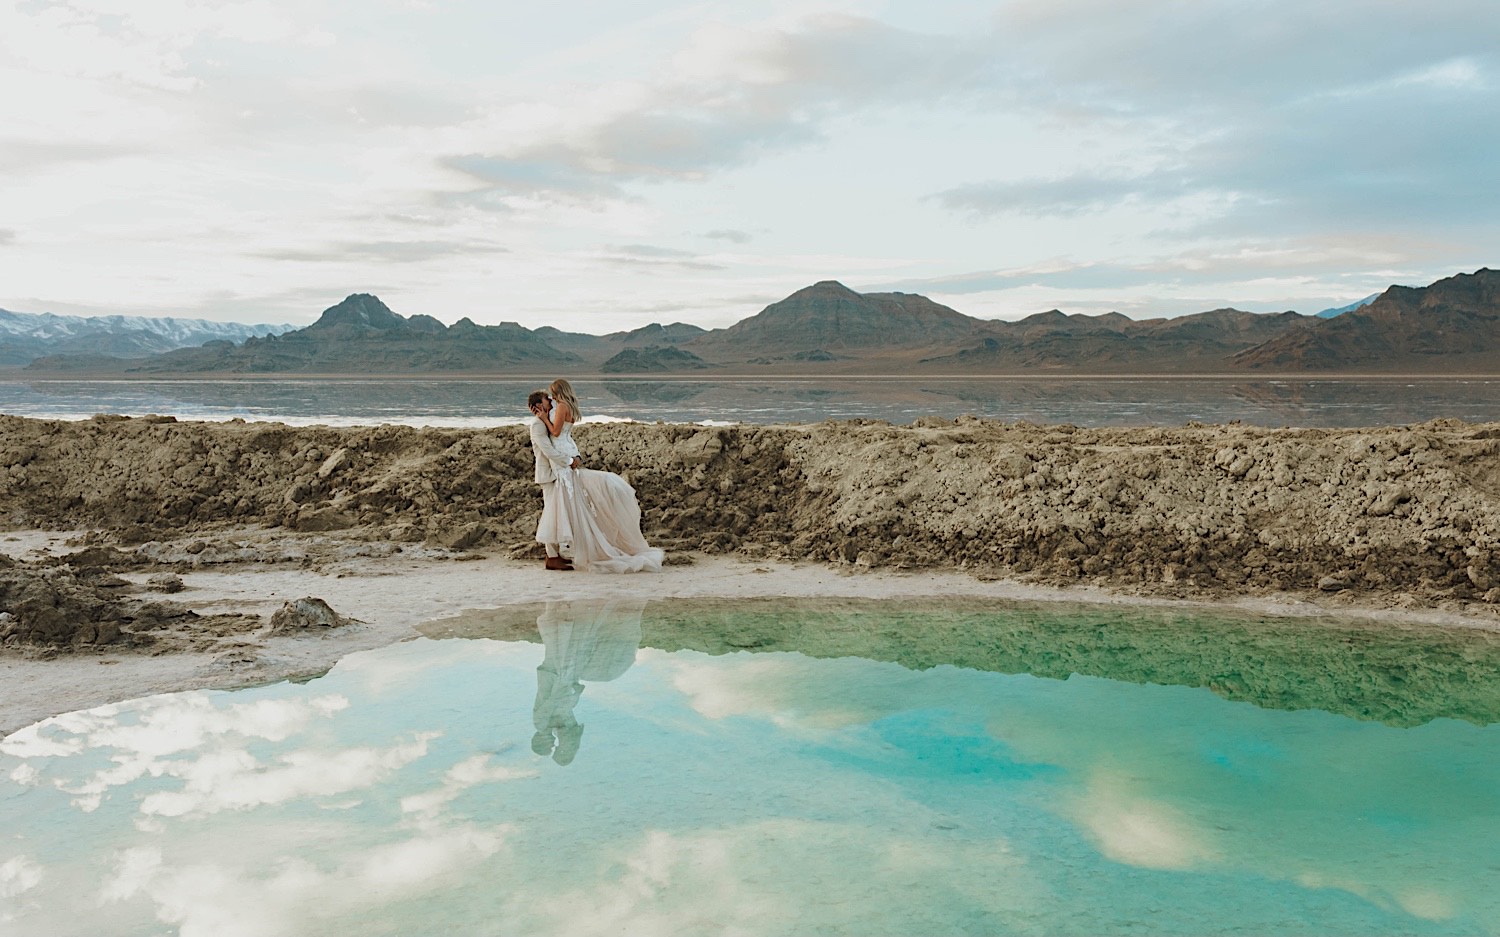 In the Utah Salt Flats, a bride is lifted in the air by the groom with a pool of water in front of them on their elopement day